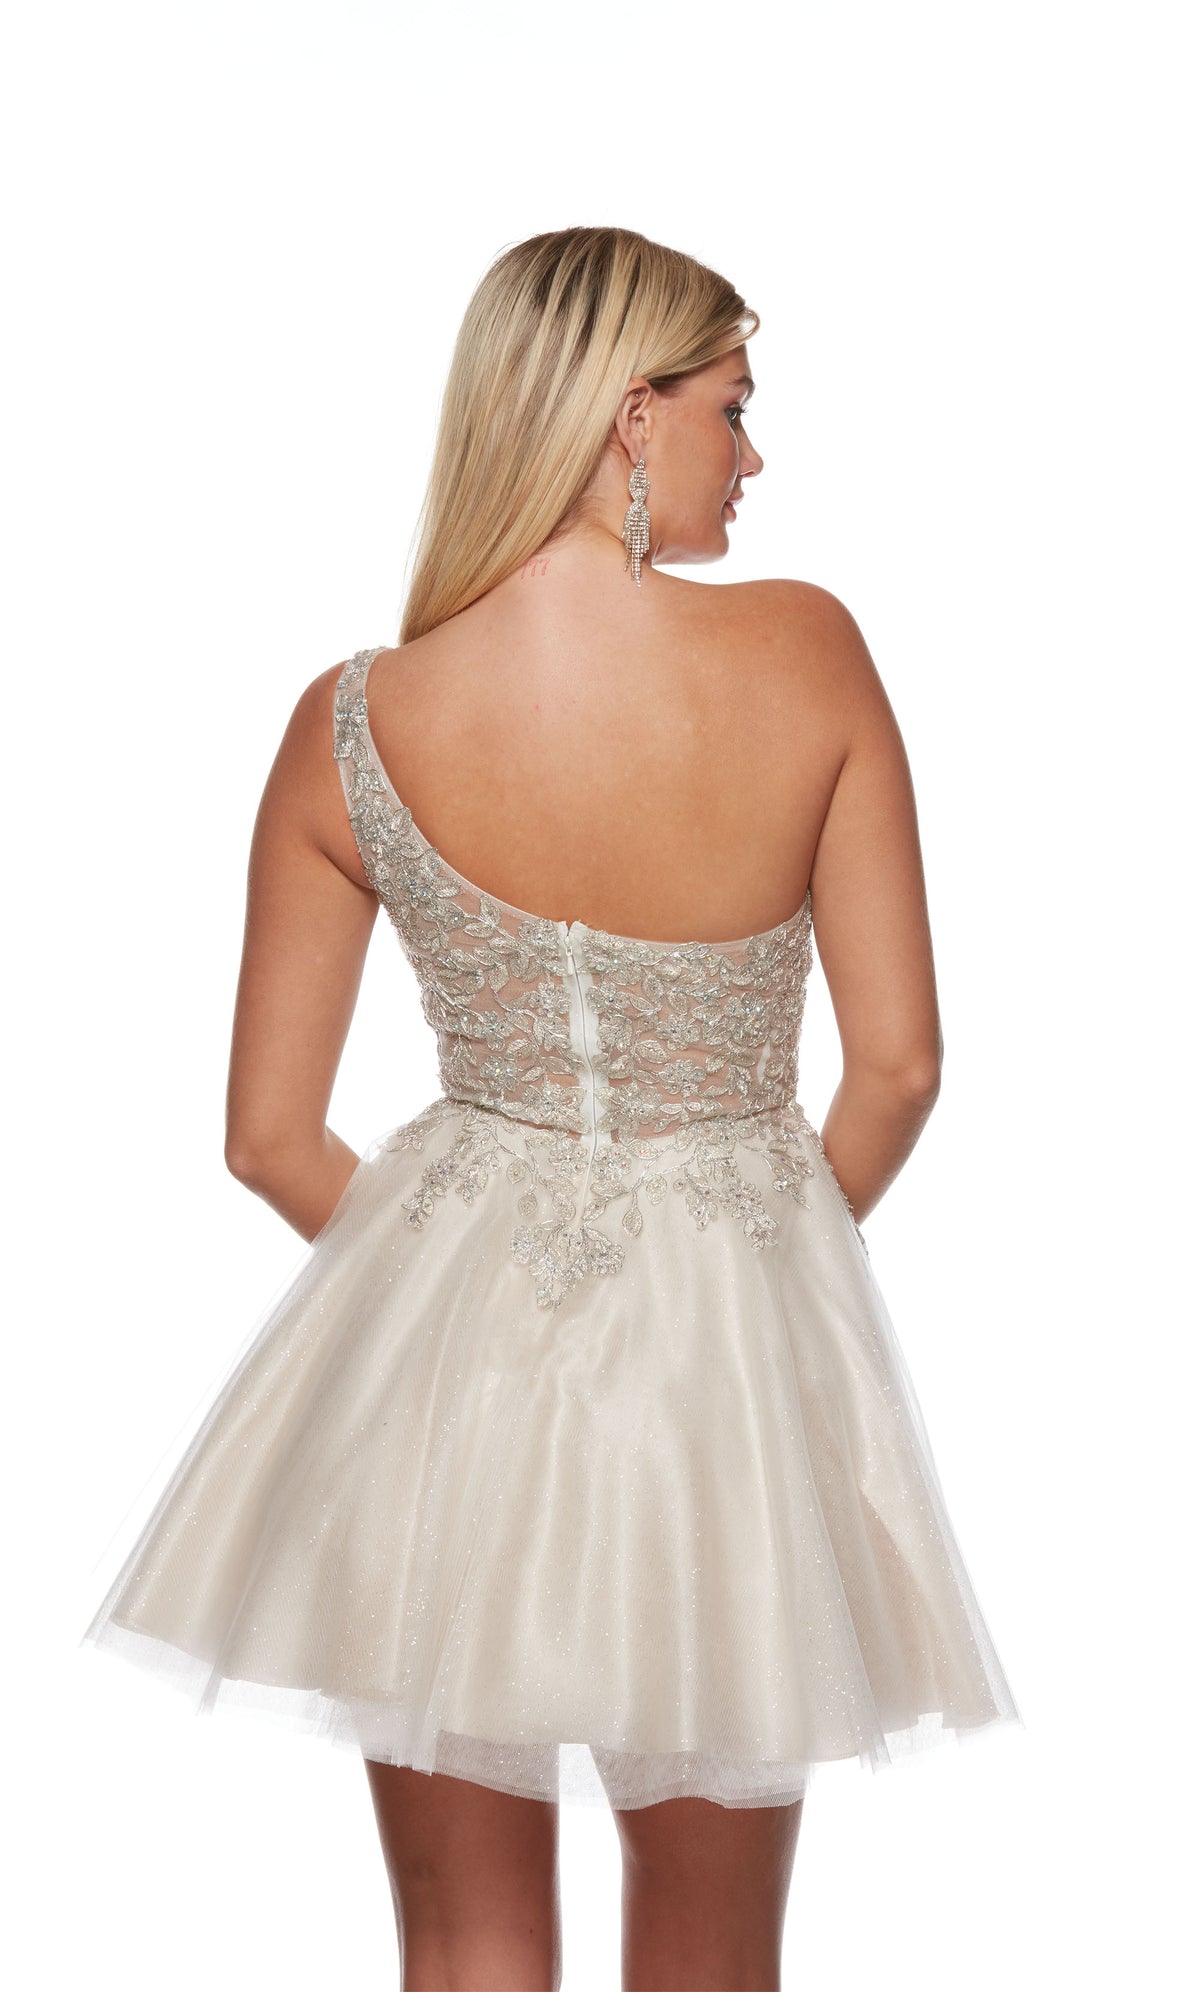 An ivory-champagne colored, one-shoulder short formal dress with a delicate lace bodice and a full tulle skirt.